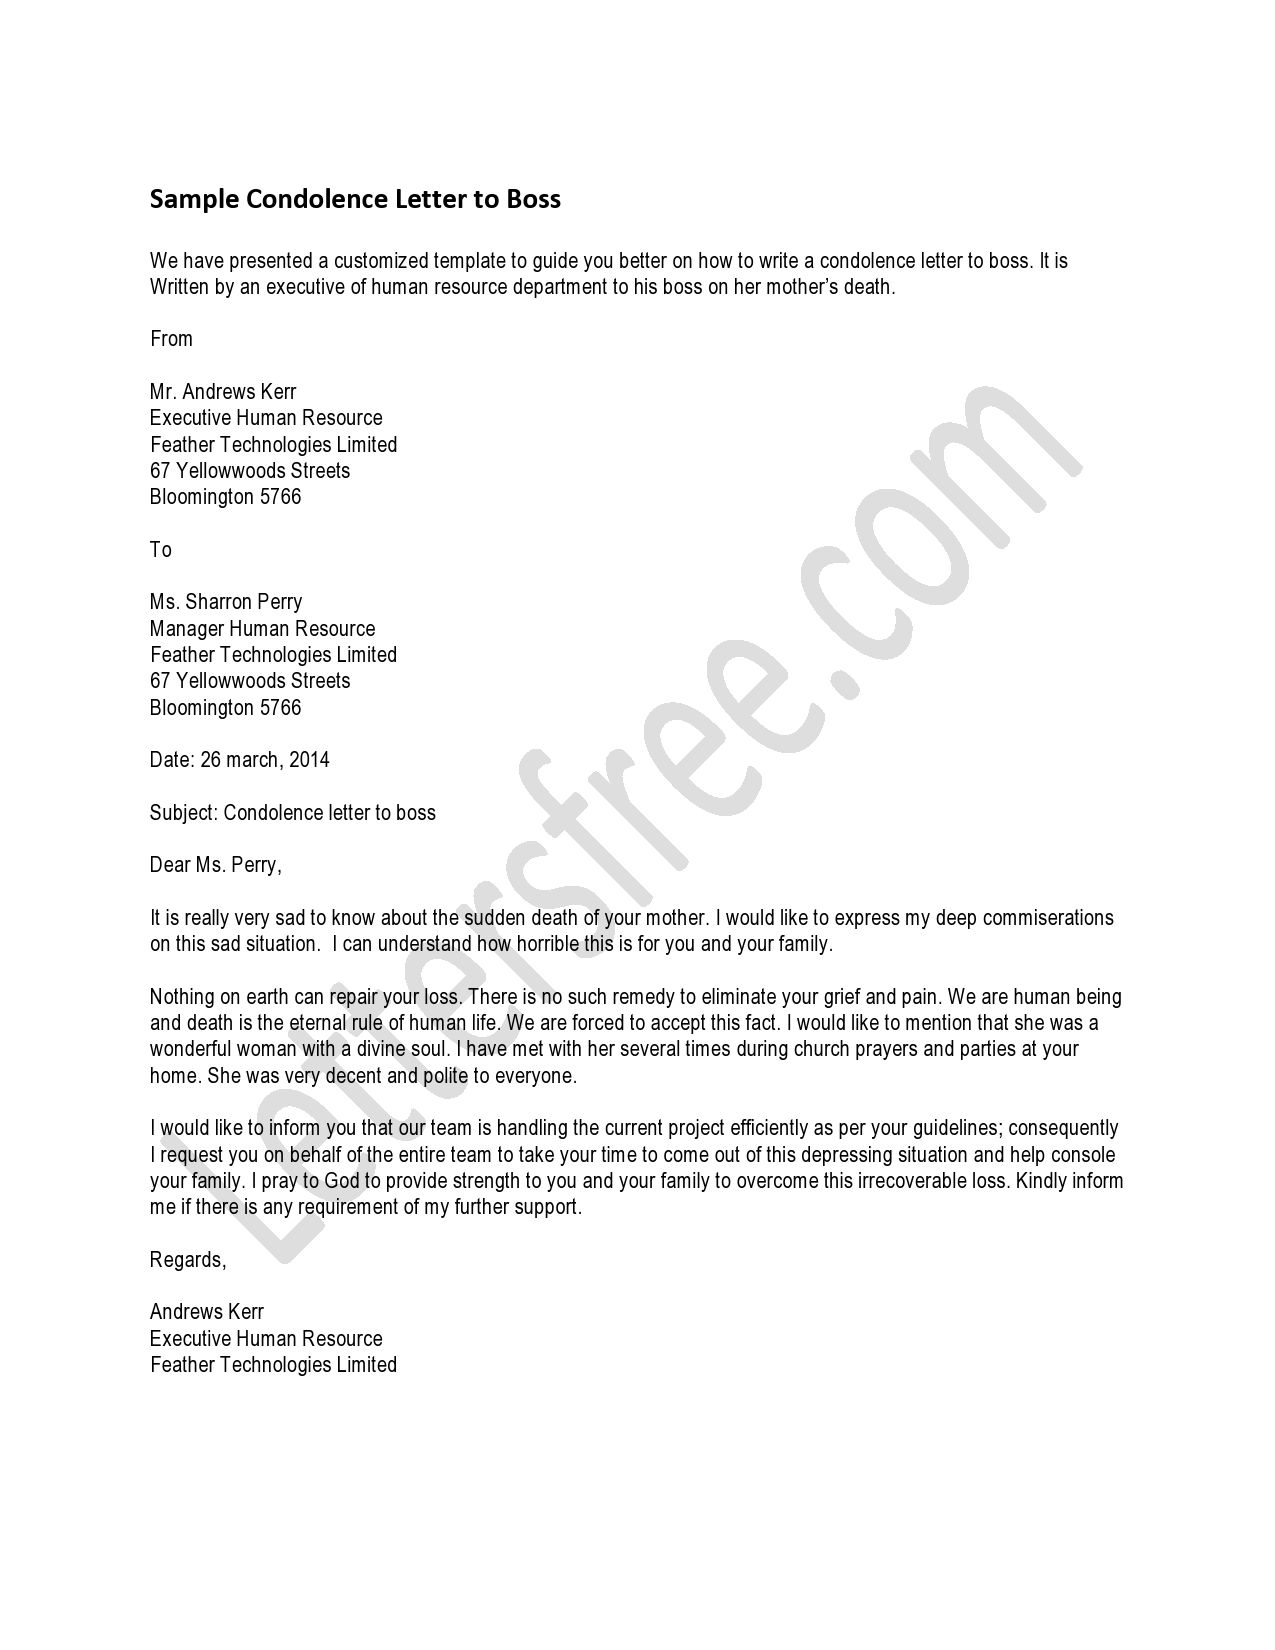 Grief Letter Template - You Can Read the Sample Letter for A Condolence Letter that You